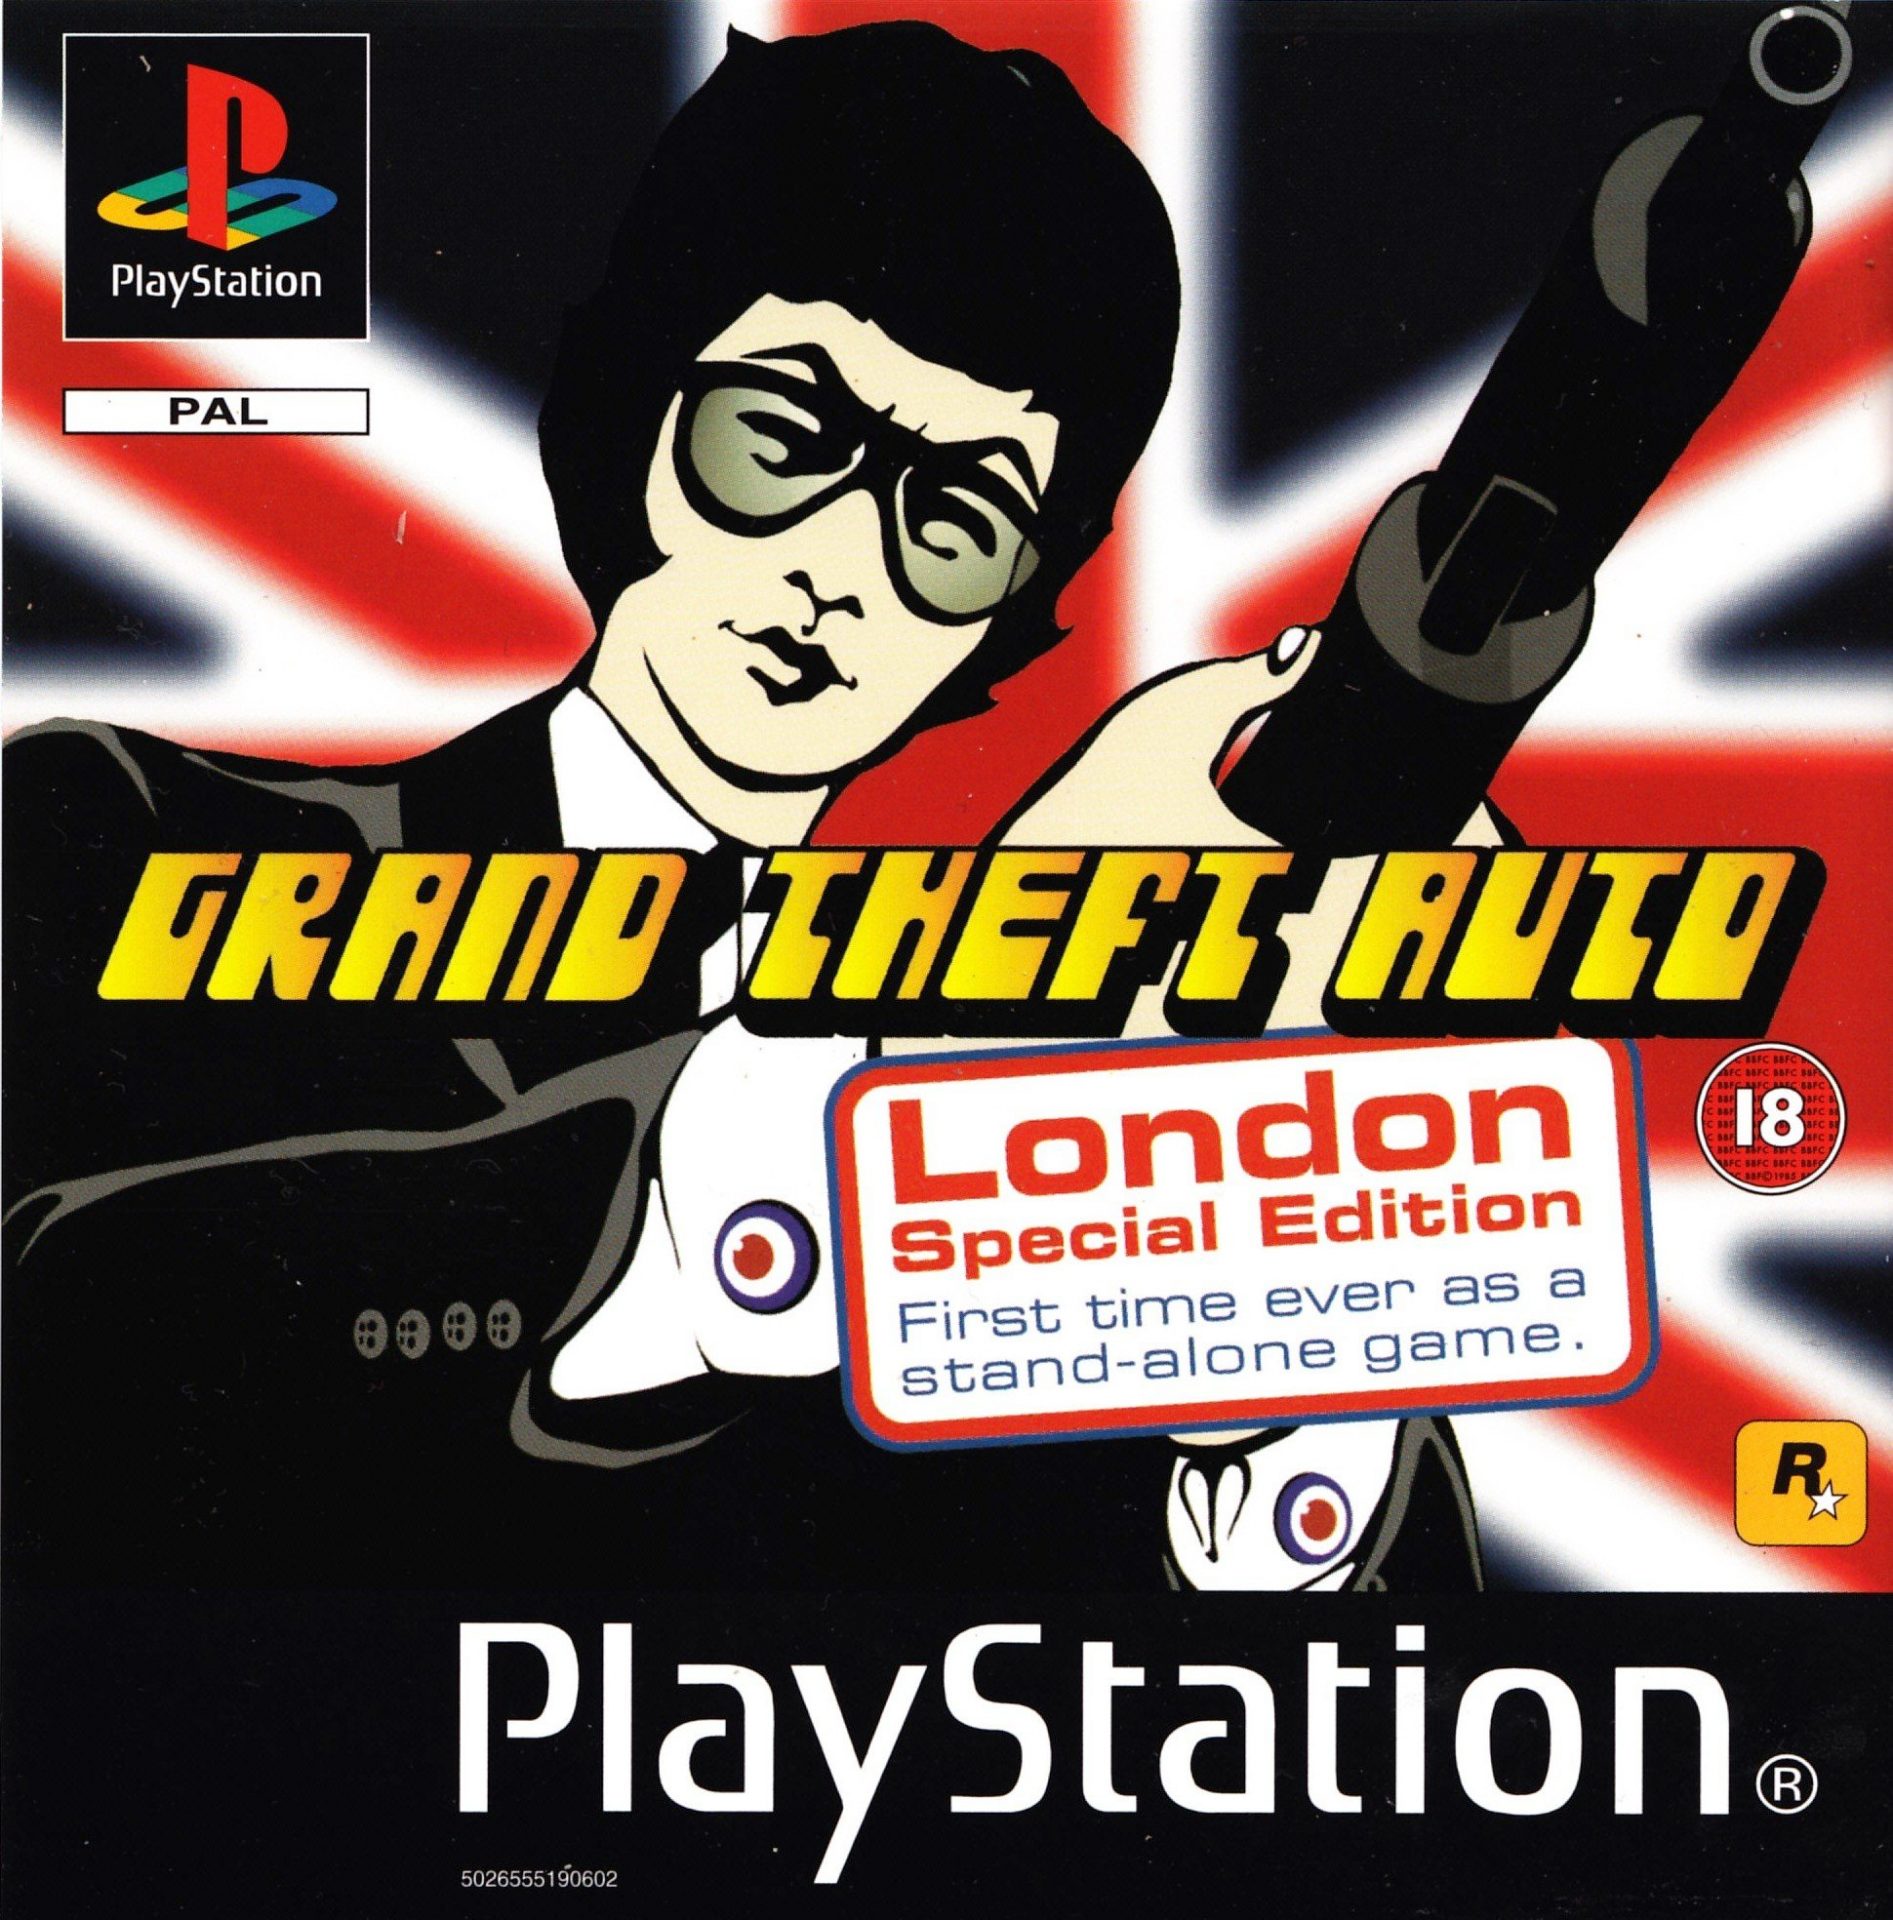 The coverart image of Grand Theft Auto: London (Special Edition)